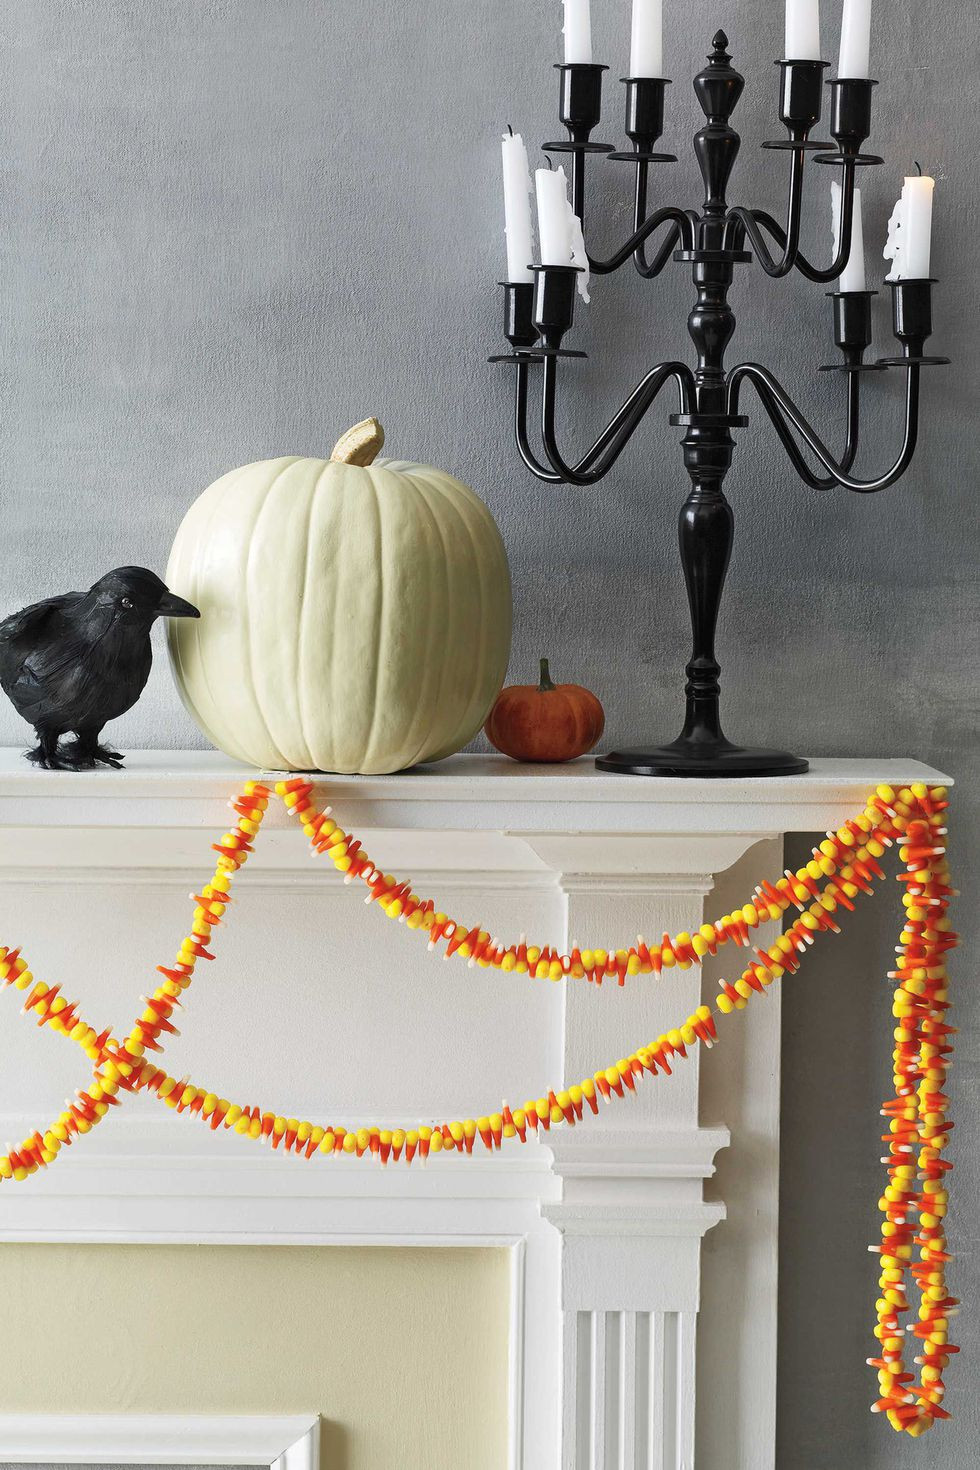 Spooky Halloween Decorations DIY
 15 Adorable DIY Halloween Decor Ideas To Add To Your